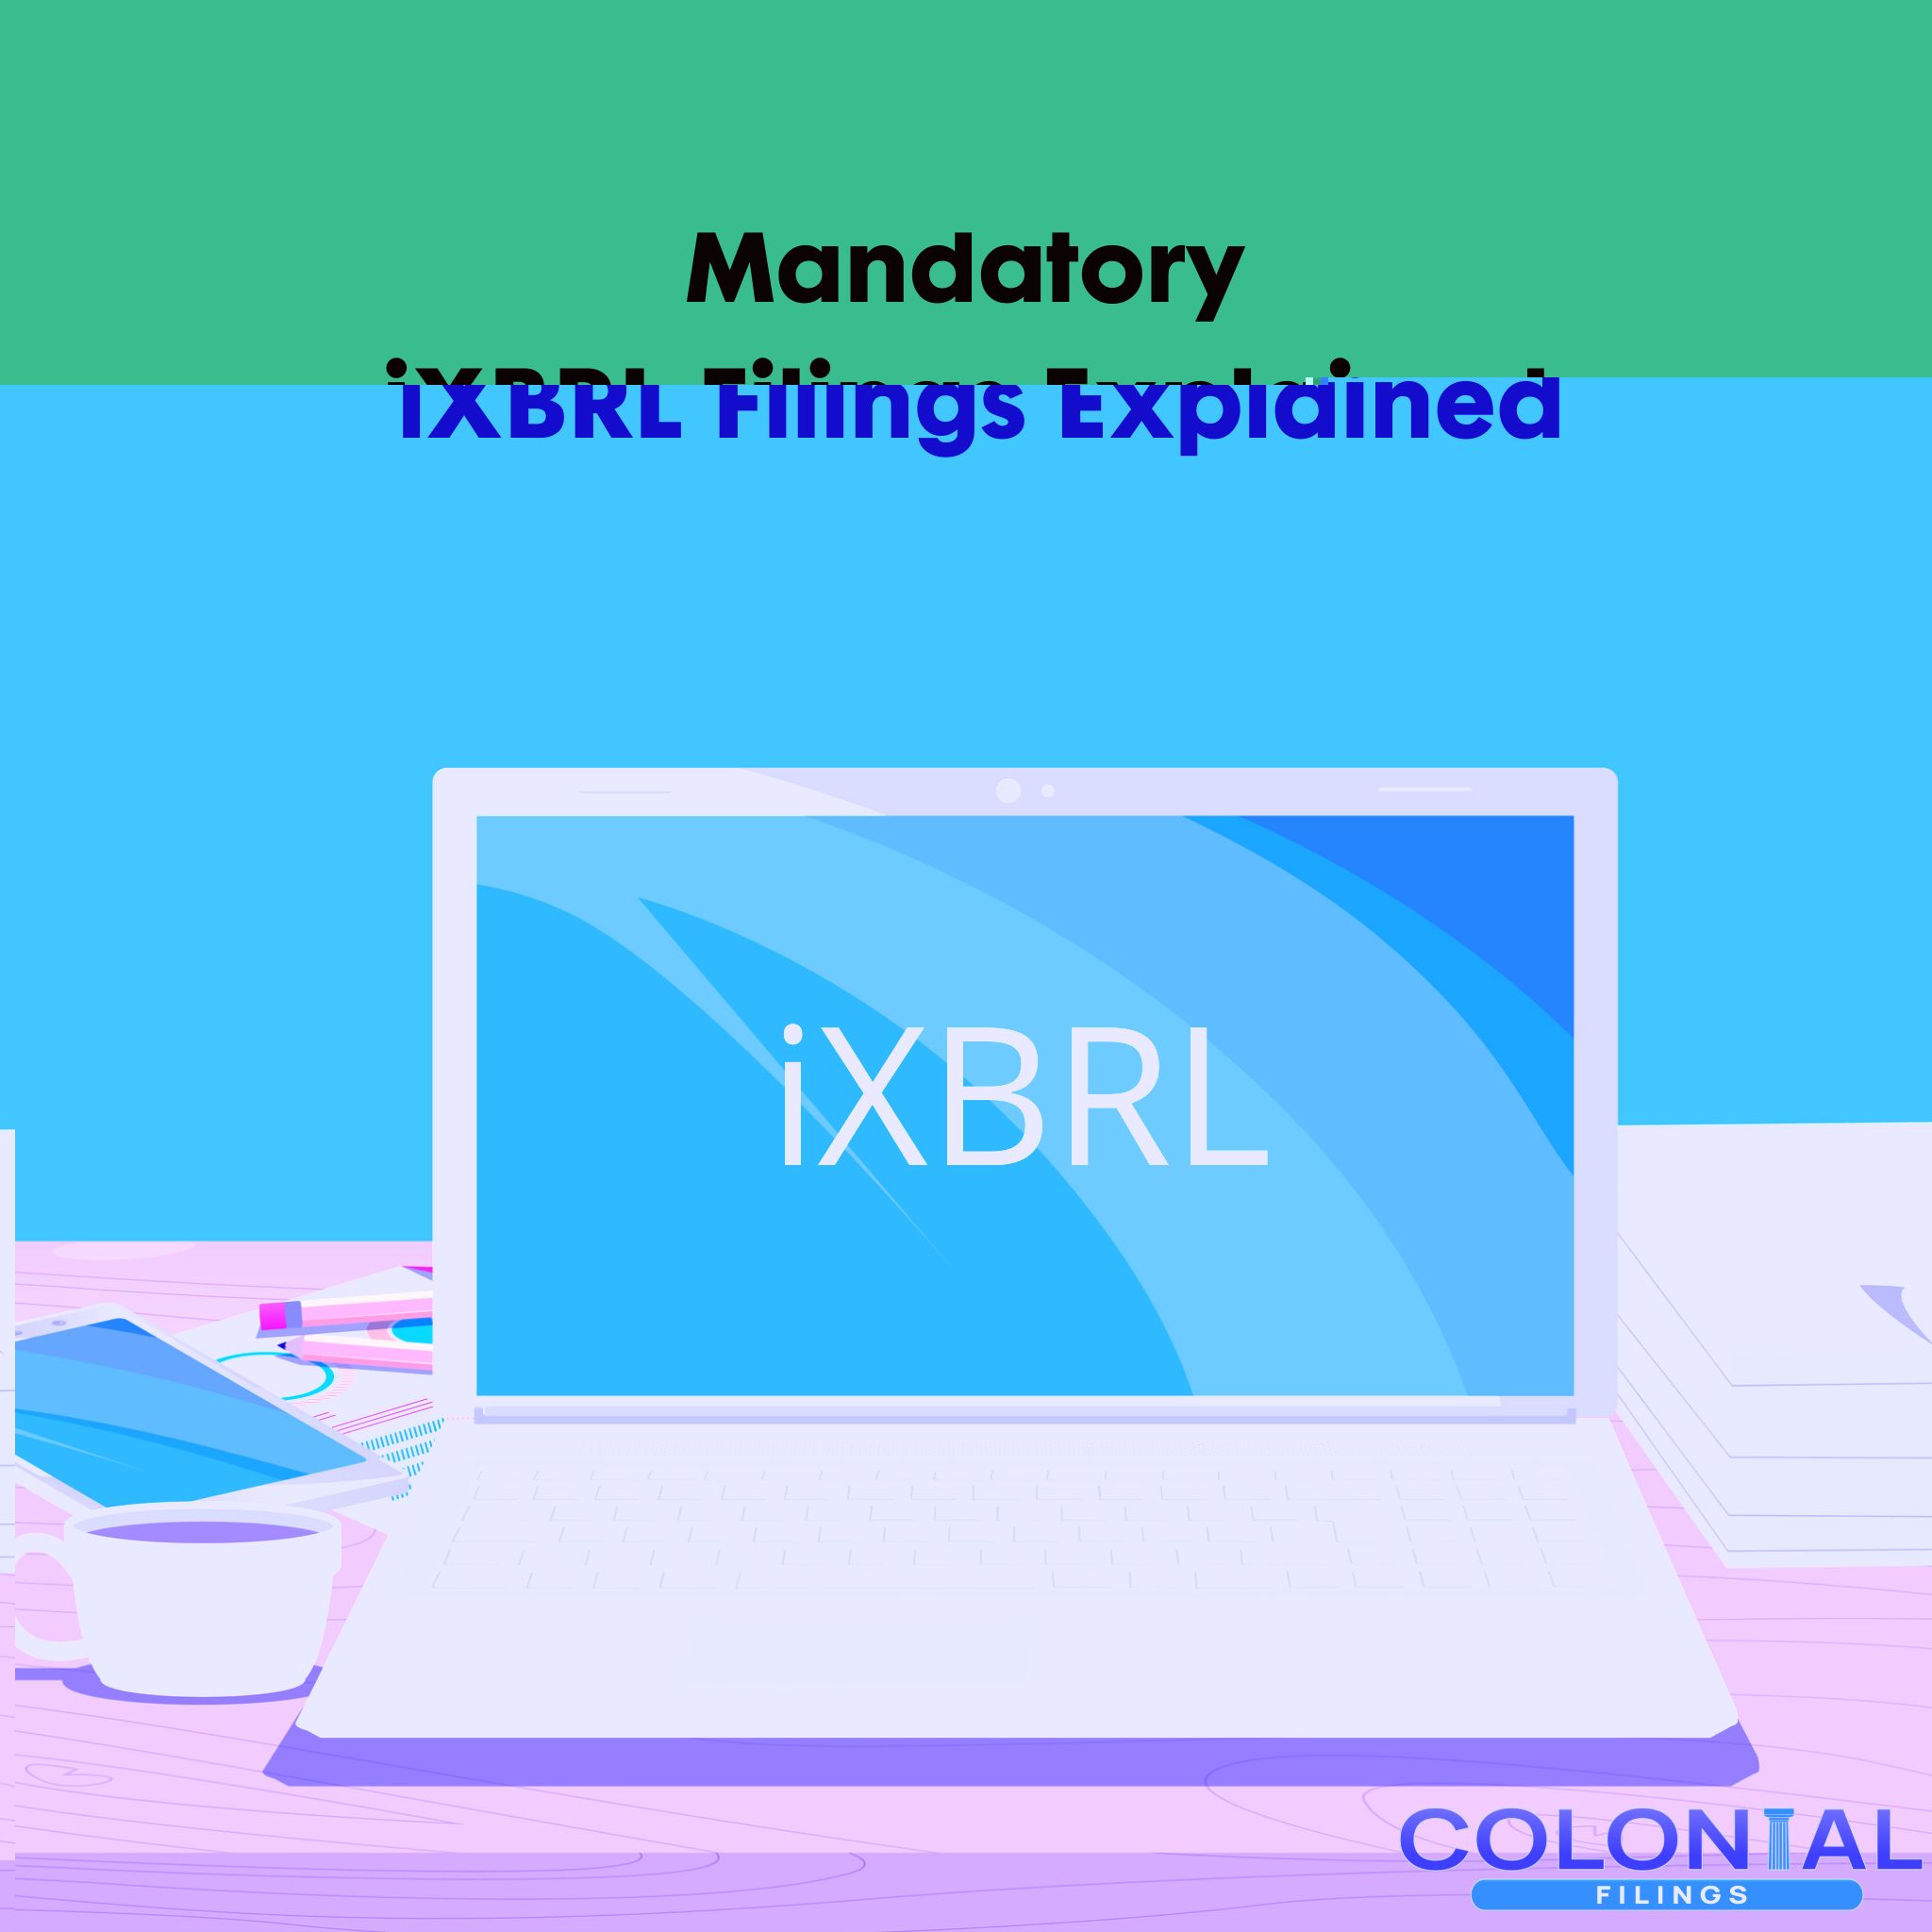 iXBRL Filings: What Are They and When Are They Mandatory?